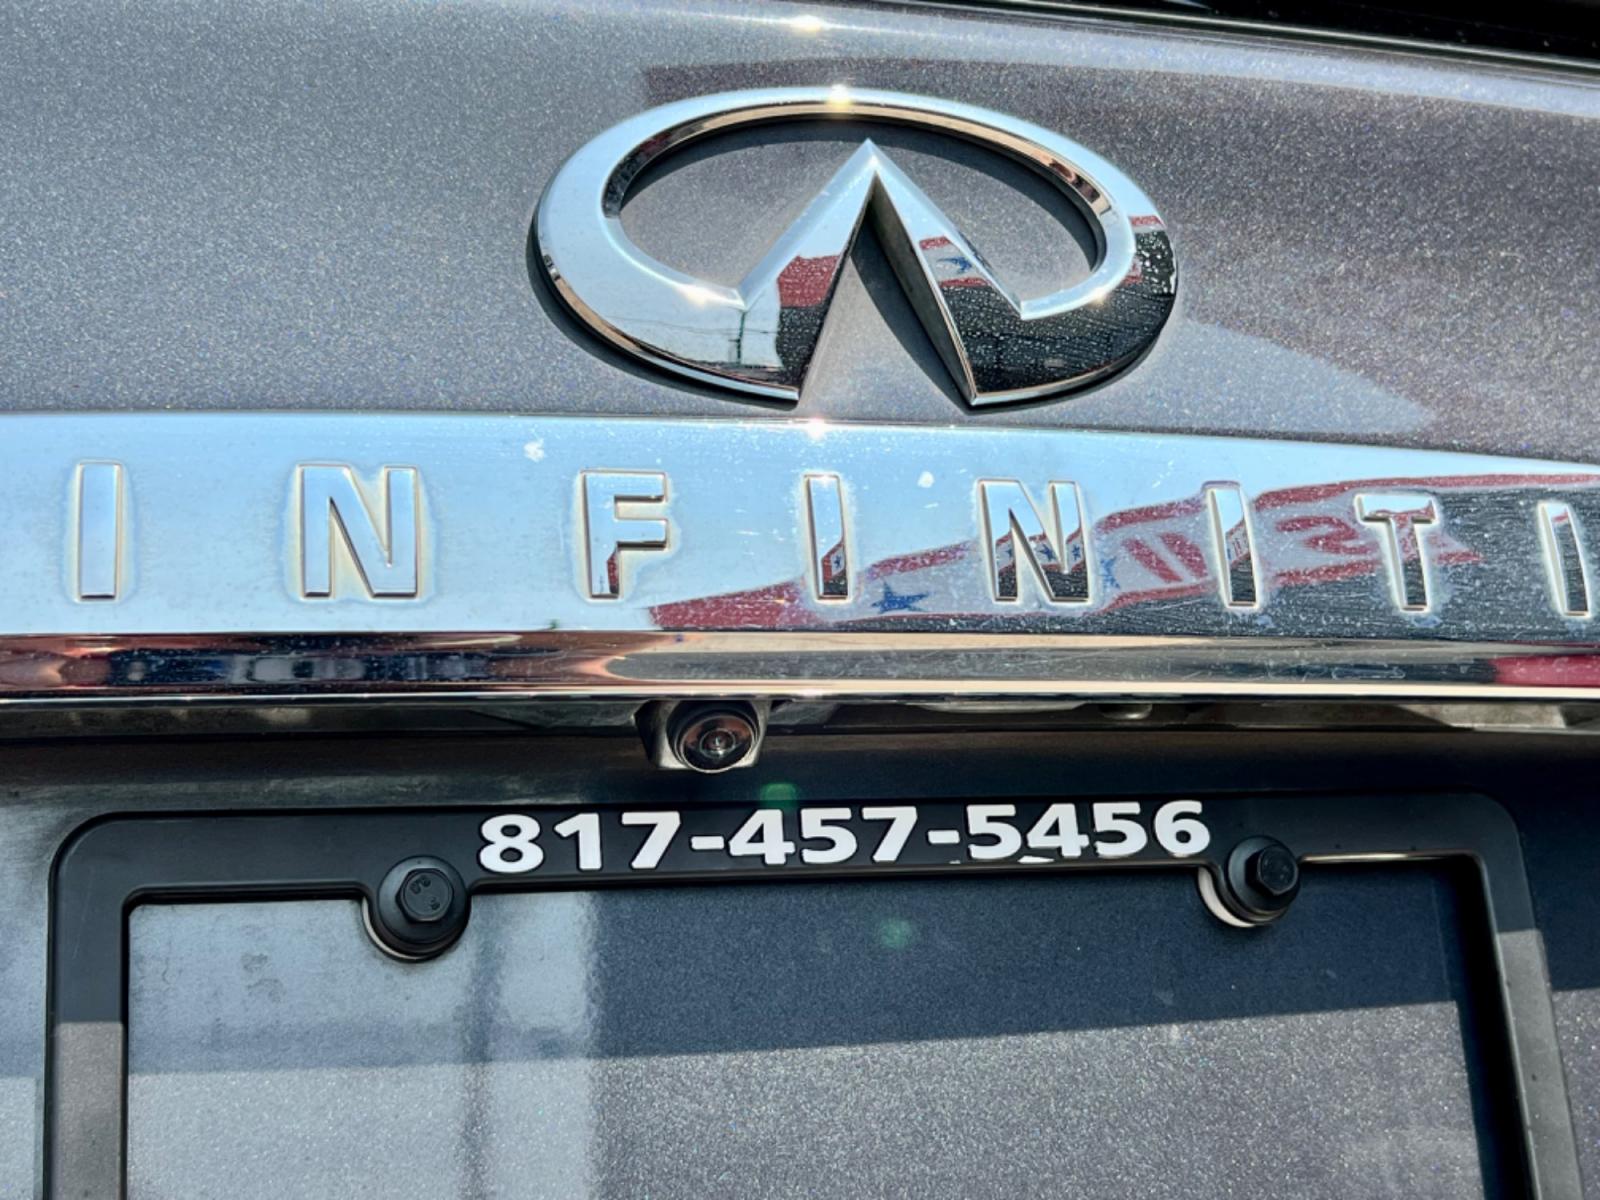 2014 GRAY INFINITI QX60 (5N1AL0MN1EC) , located at 5900 E. Lancaster Ave., Fort Worth, TX, 76112, (817) 457-5456, 0.000000, 0.000000 - This is a 2014 INFINITI QX60 4 DOOR SUV that is in excellent condition. There are no dents or scratches. The interior is clean with no rips or tears or stains. All power windows, door locks and seats. Ice cold AC for those hot Texas summer days. It is equipped with a CD player, AM/FM radio, AUX port - Photo #23